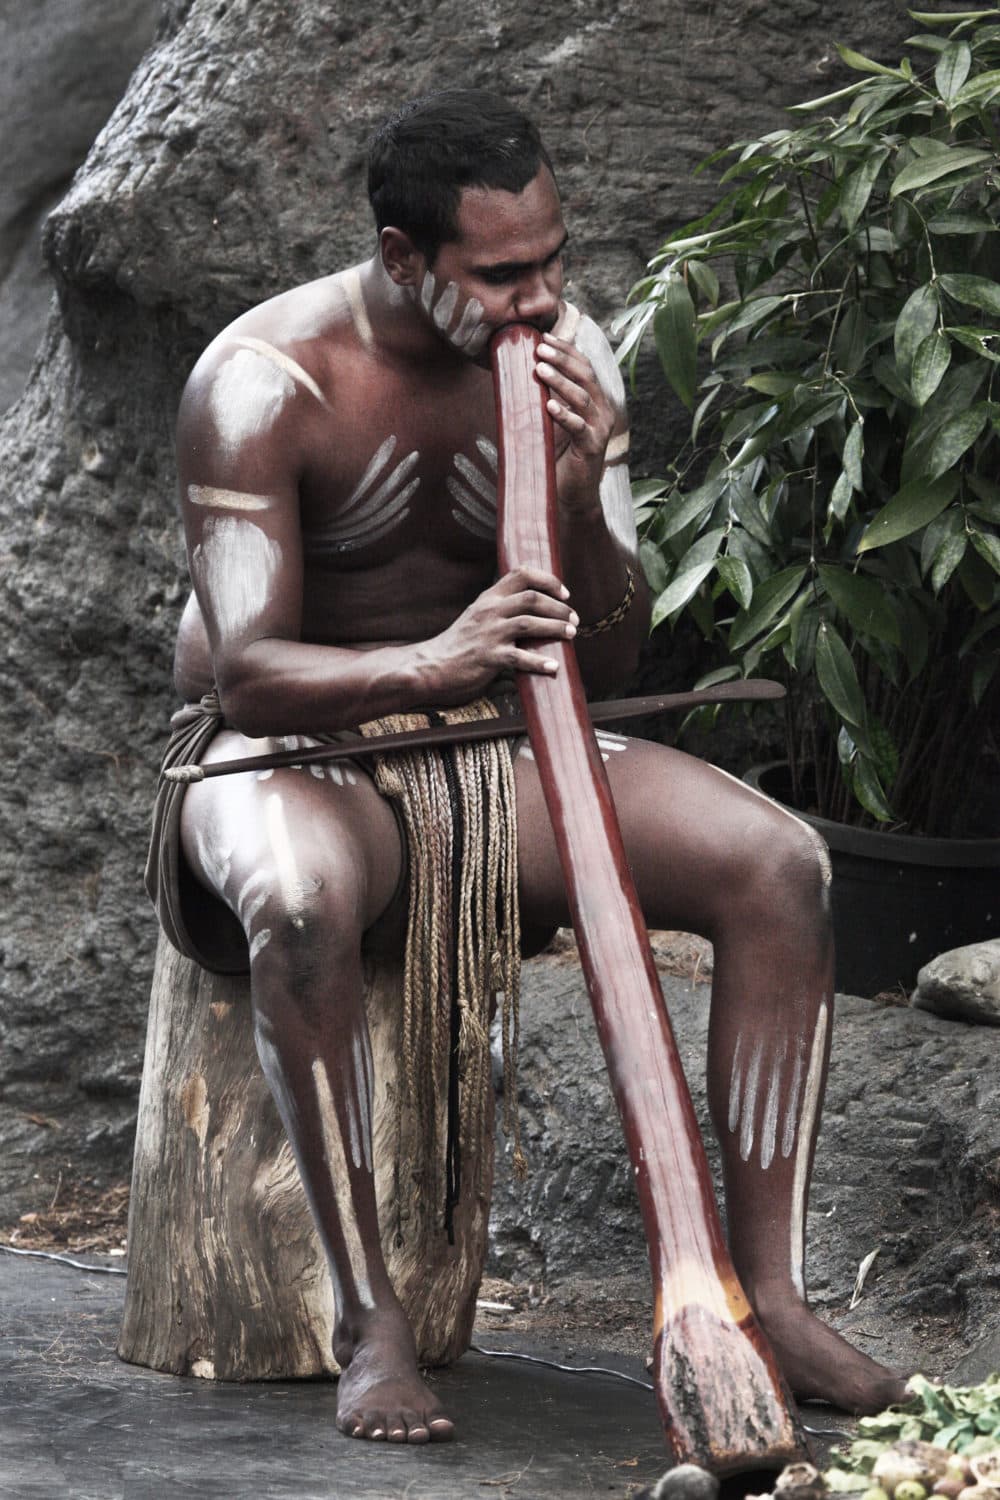 The traditional Aboriginal musical instrument, the didgeridoo, dates back tens of thousands of years. (courtesy of Steve Evans)